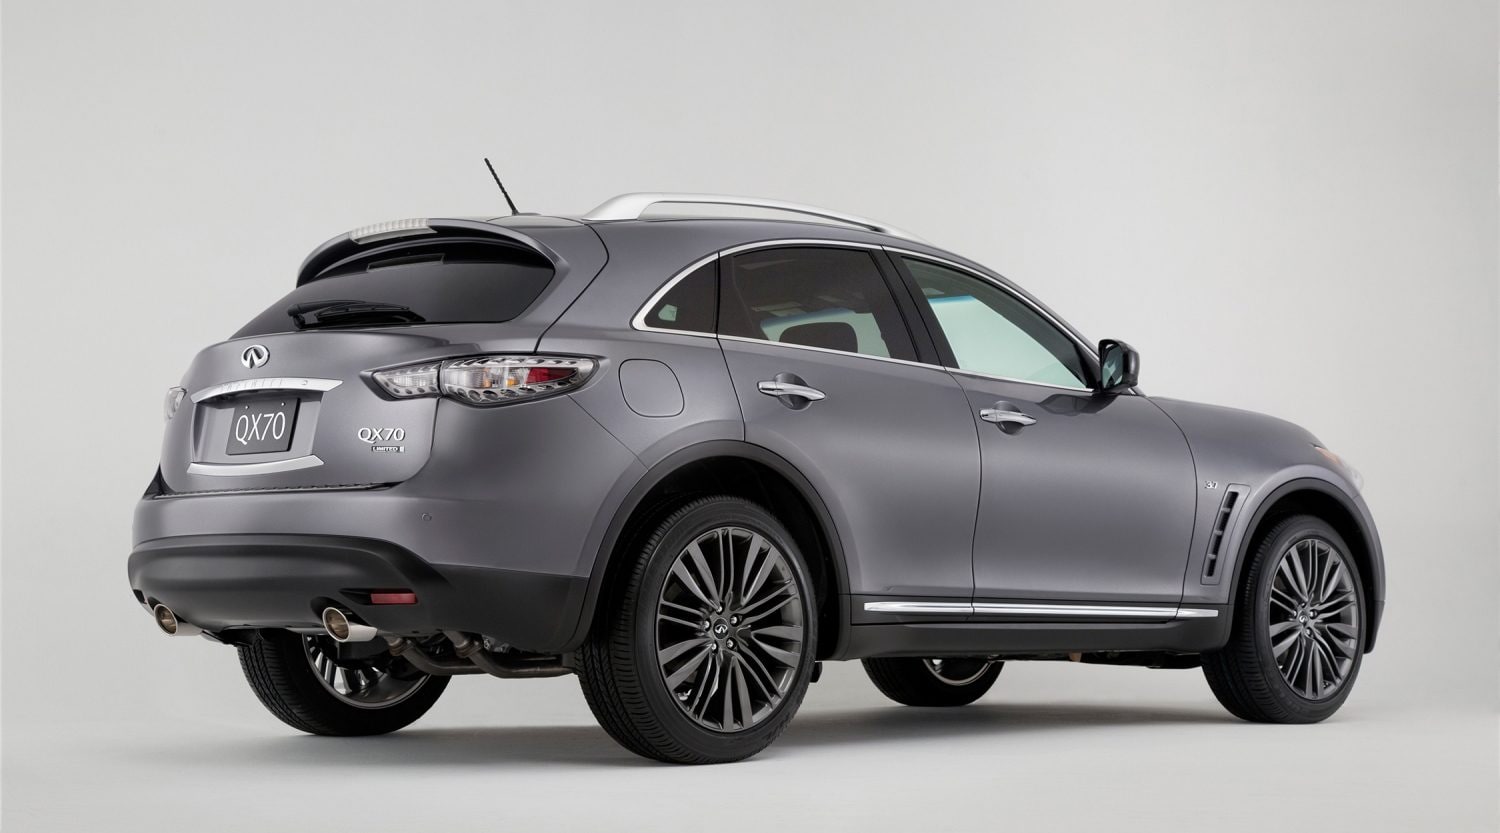 2017 INFINITI QX70 Limited Crossover